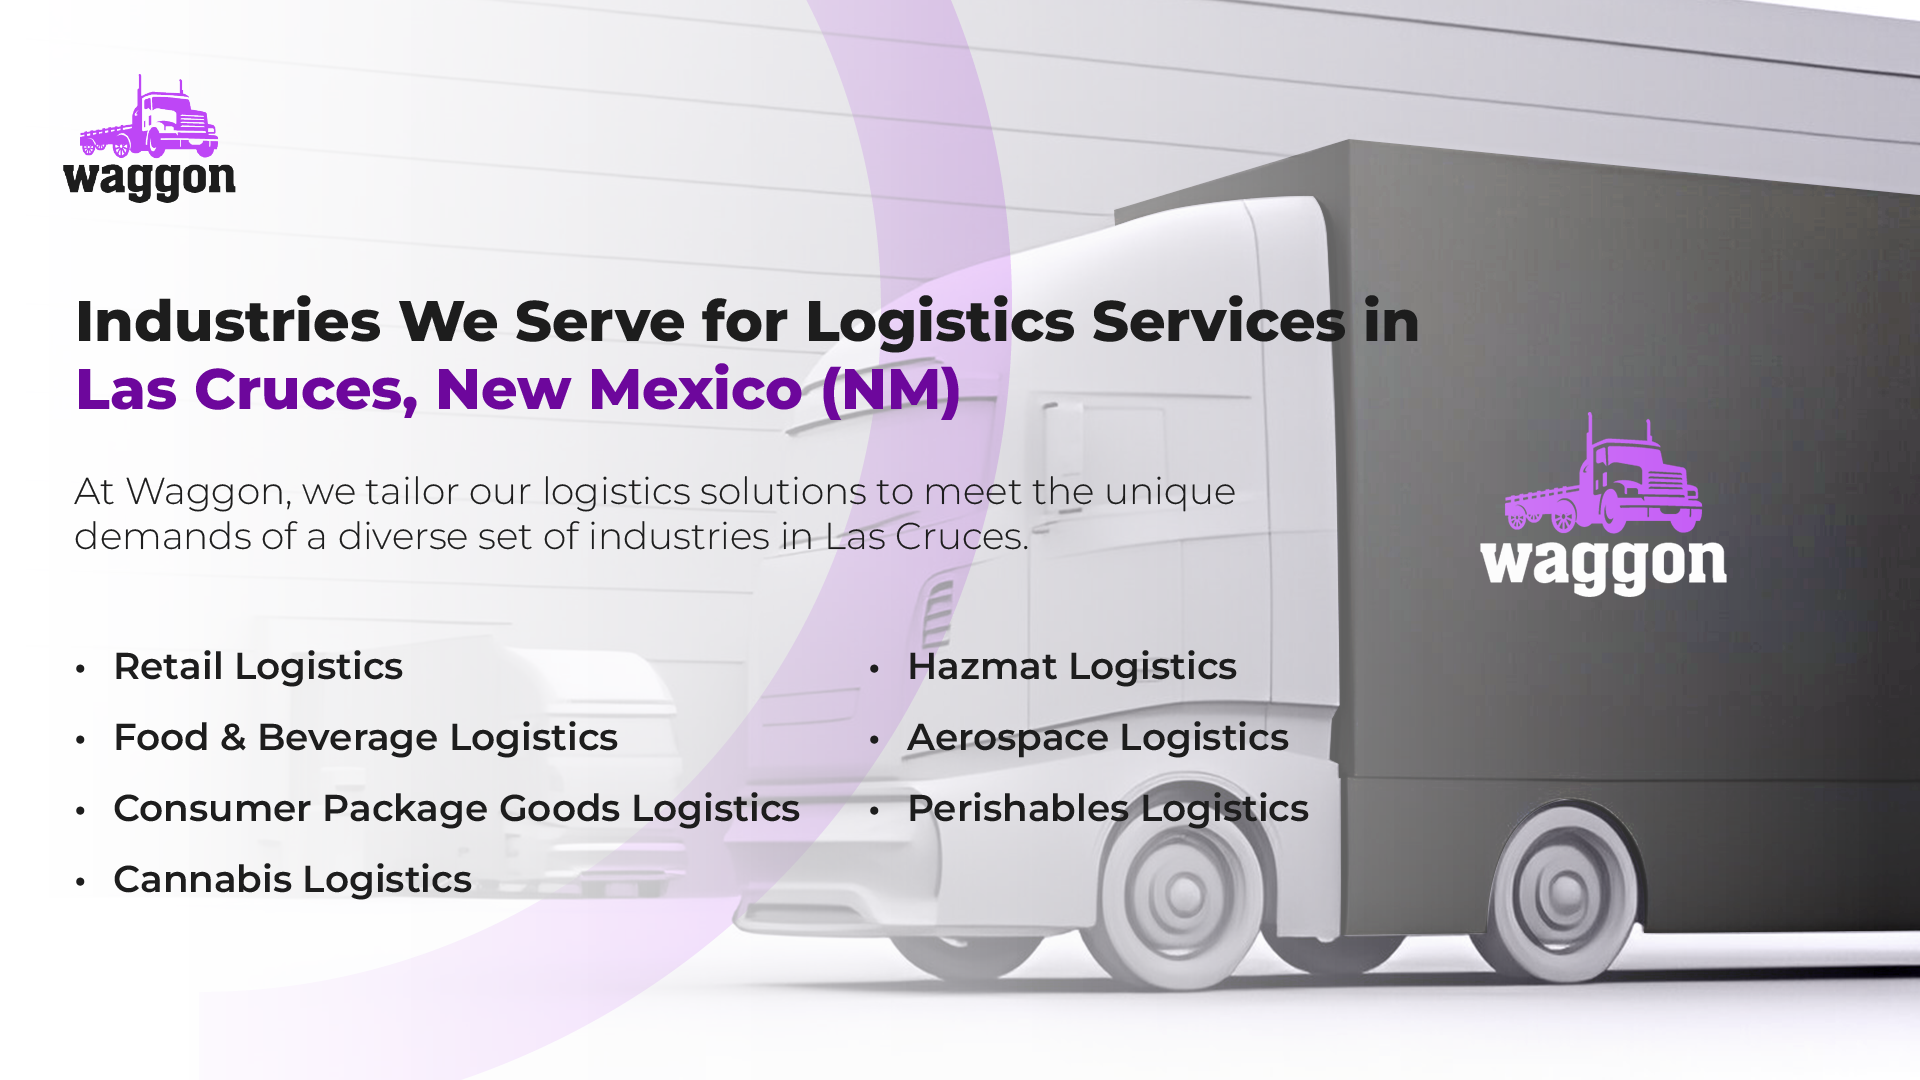 Industries We Serve for Logistics Services in Las Cruces, New Mexico (NM)